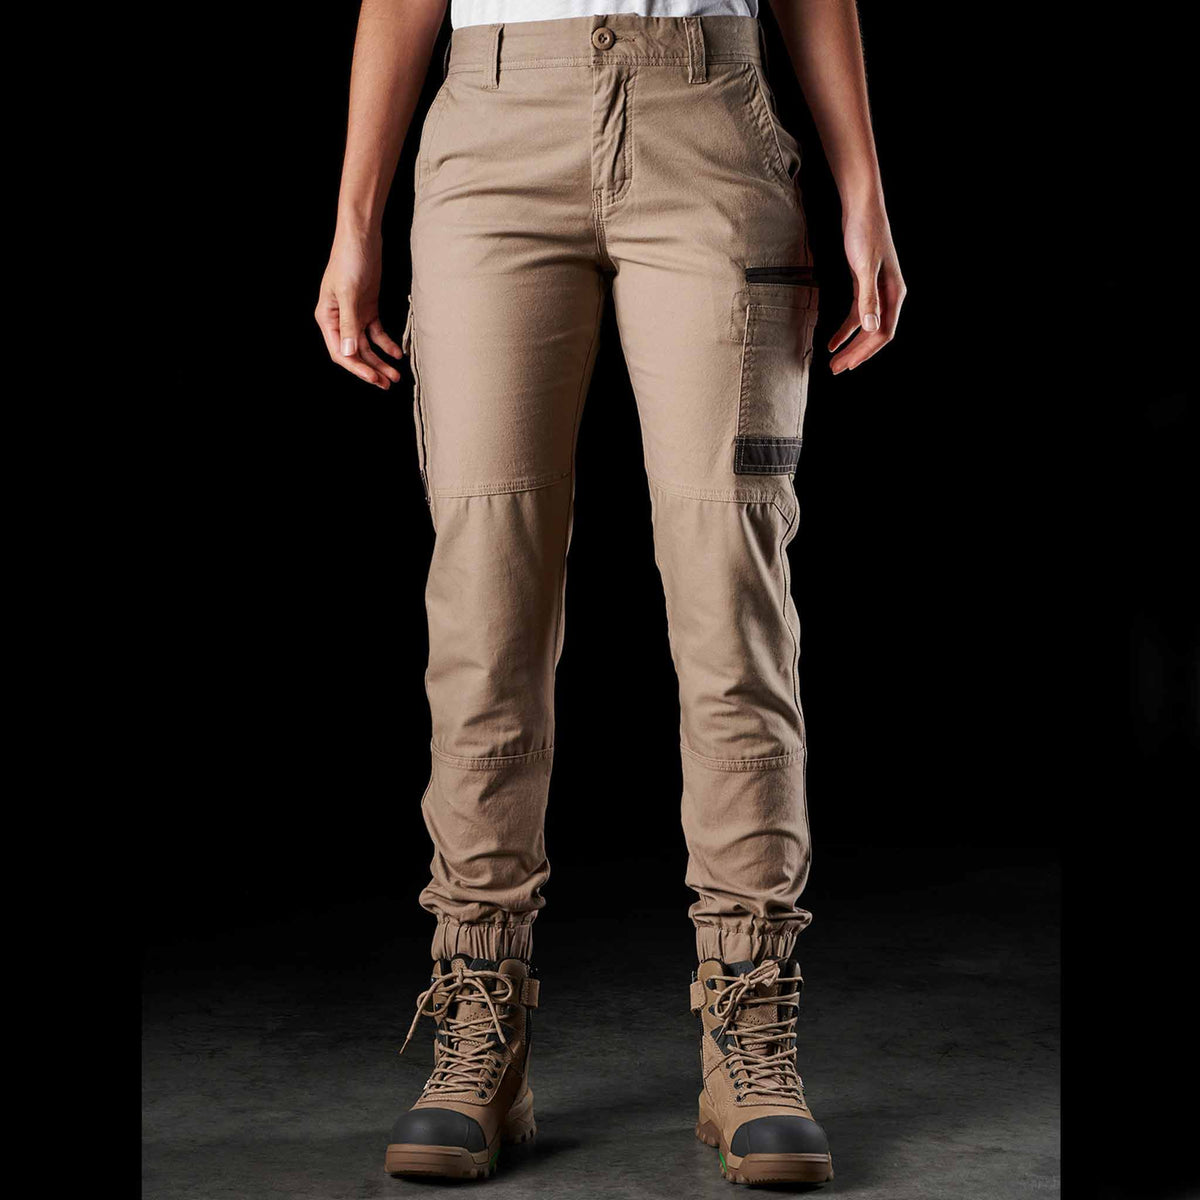 WP-4 CUFFED WORK PANT FXD – WebSafety